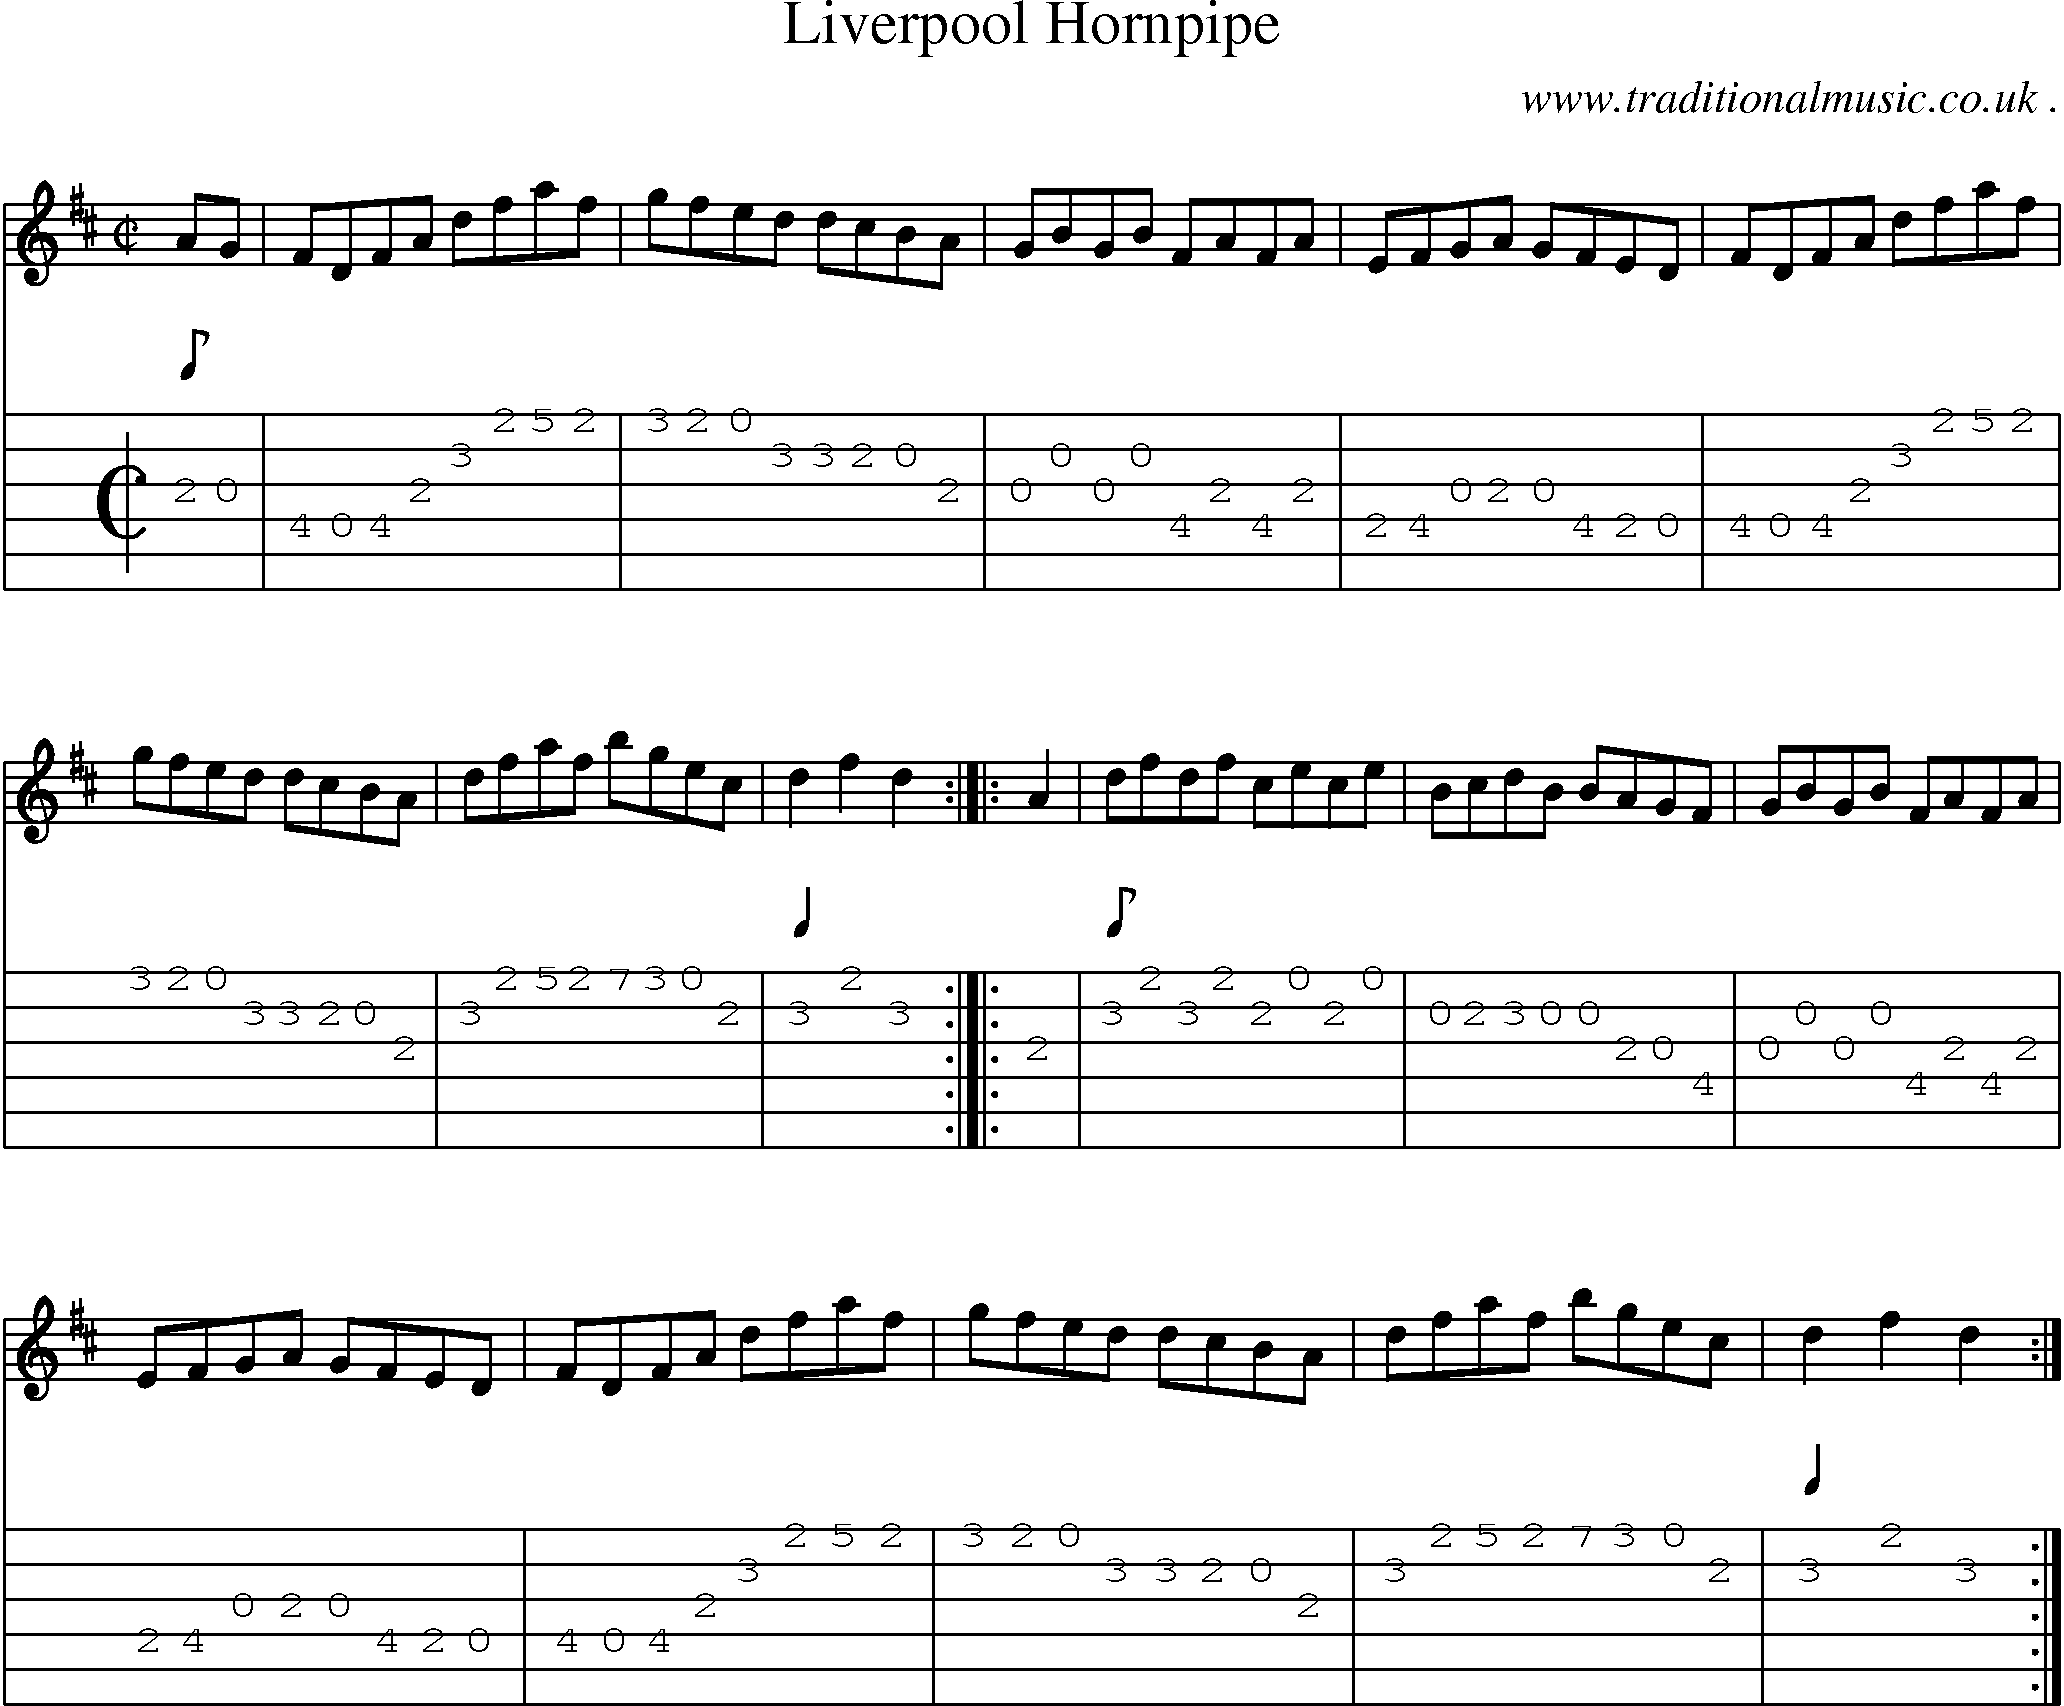 Sheet-music  score, Chords and Guitar Tabs for Liverpool Hornpipe